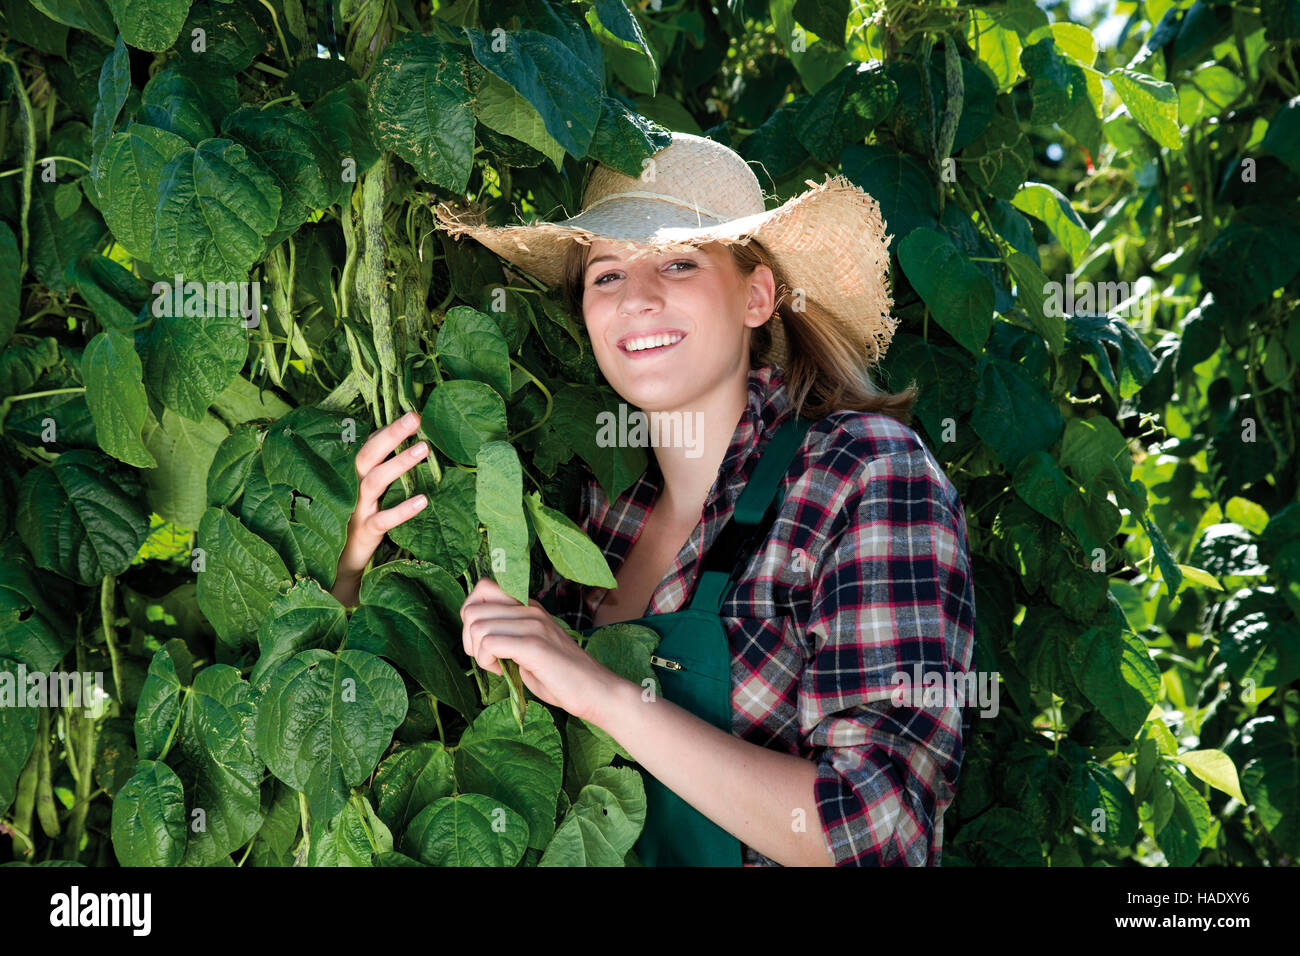 Young woman with straw hat harvesting beans Stock Photo